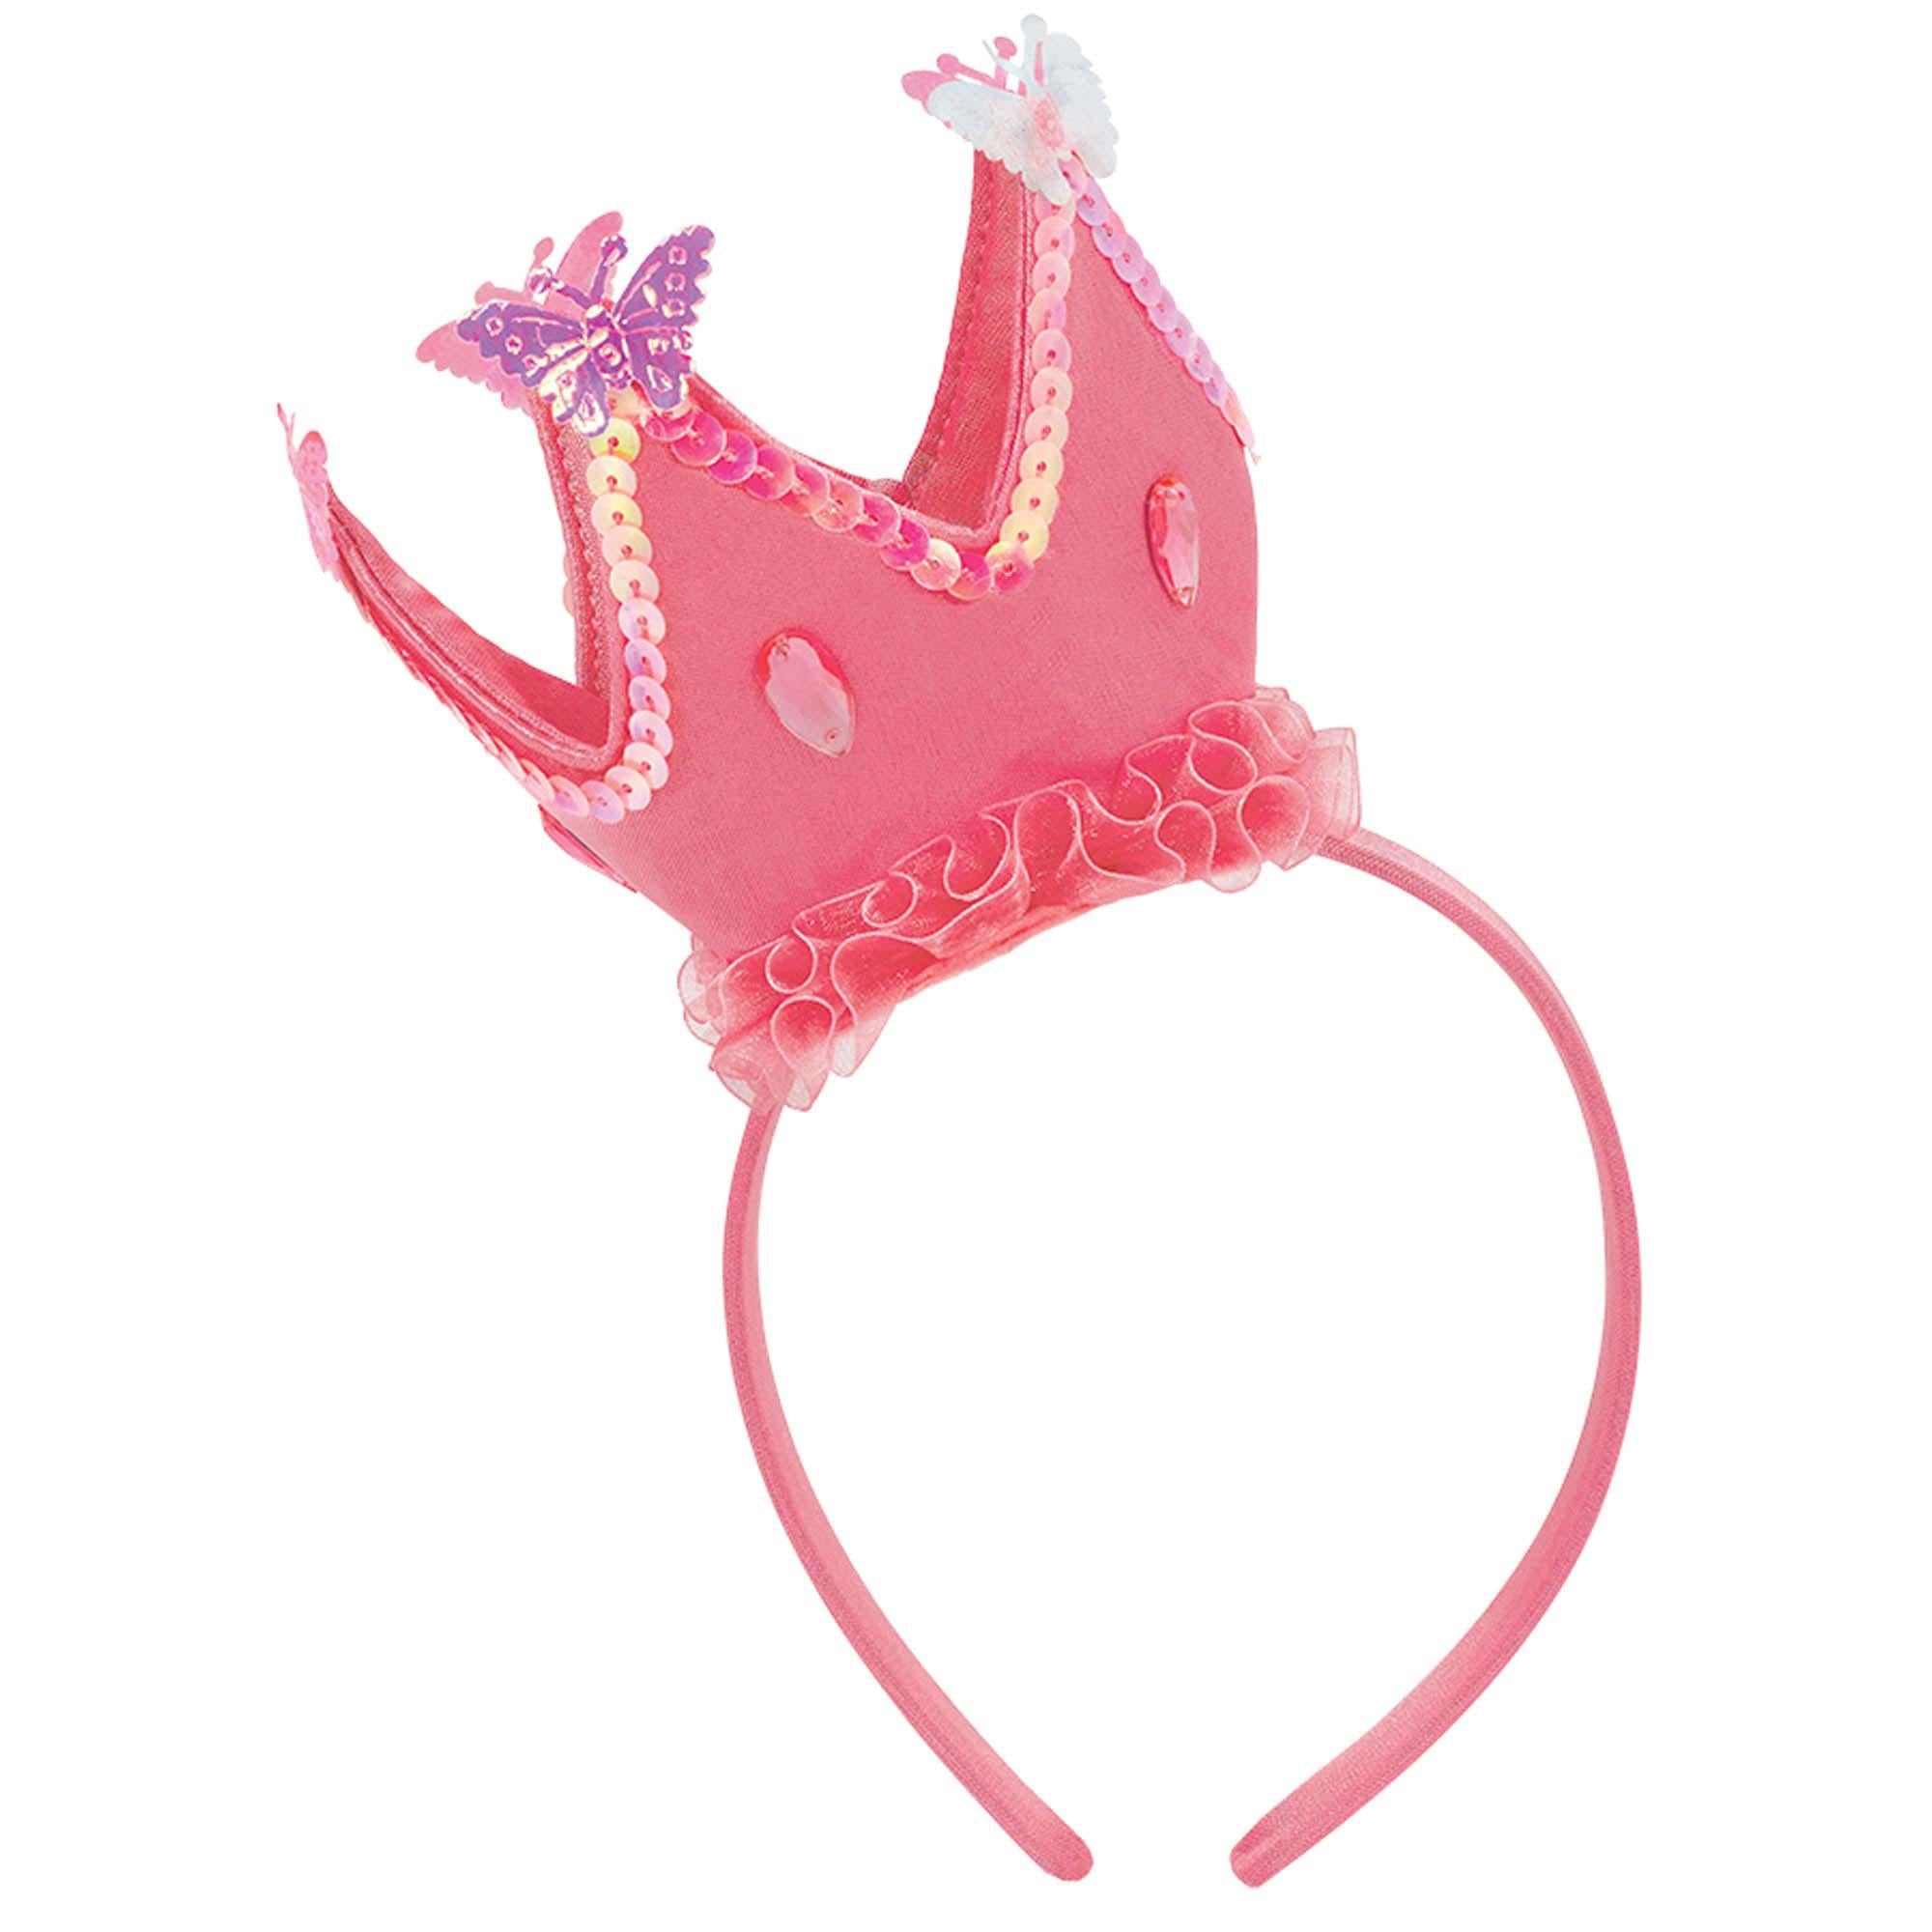 Woodland Princess Deluxe Fabric Headband Costumes & Apparel - Party Centre